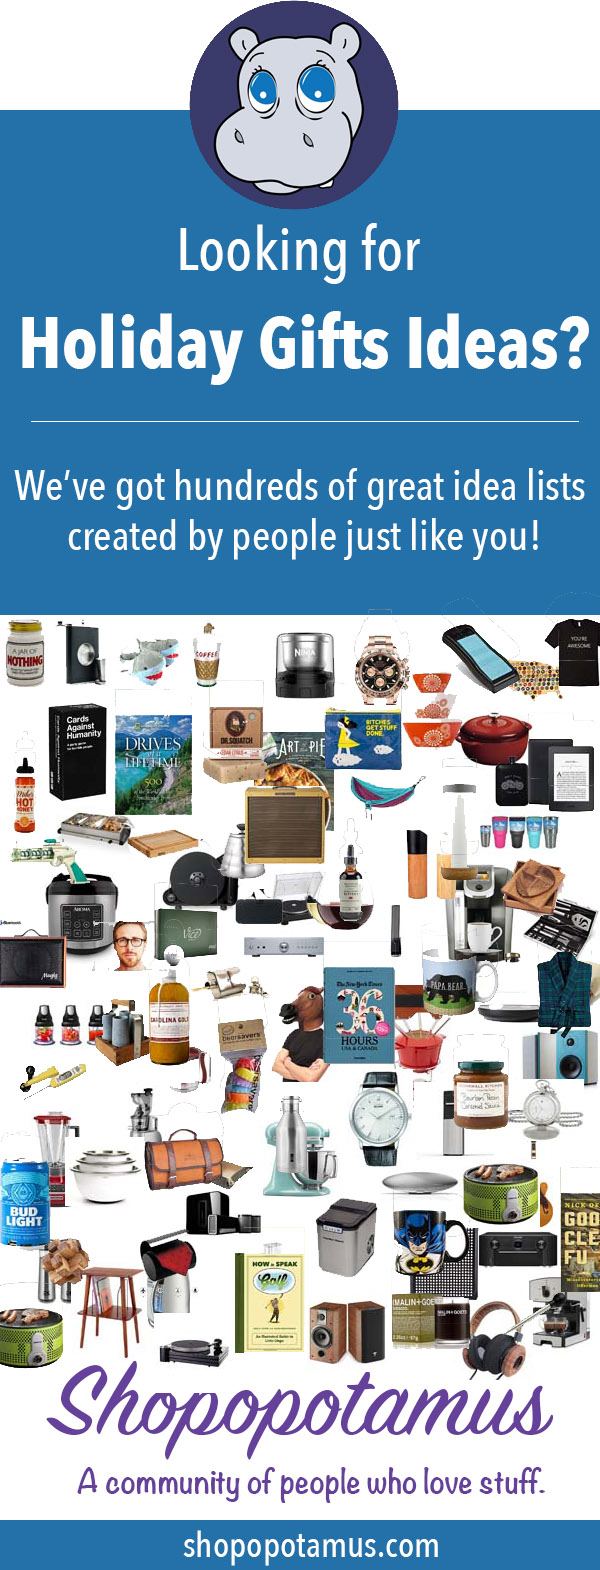 Great collections of Gifts ideas created by people like you.